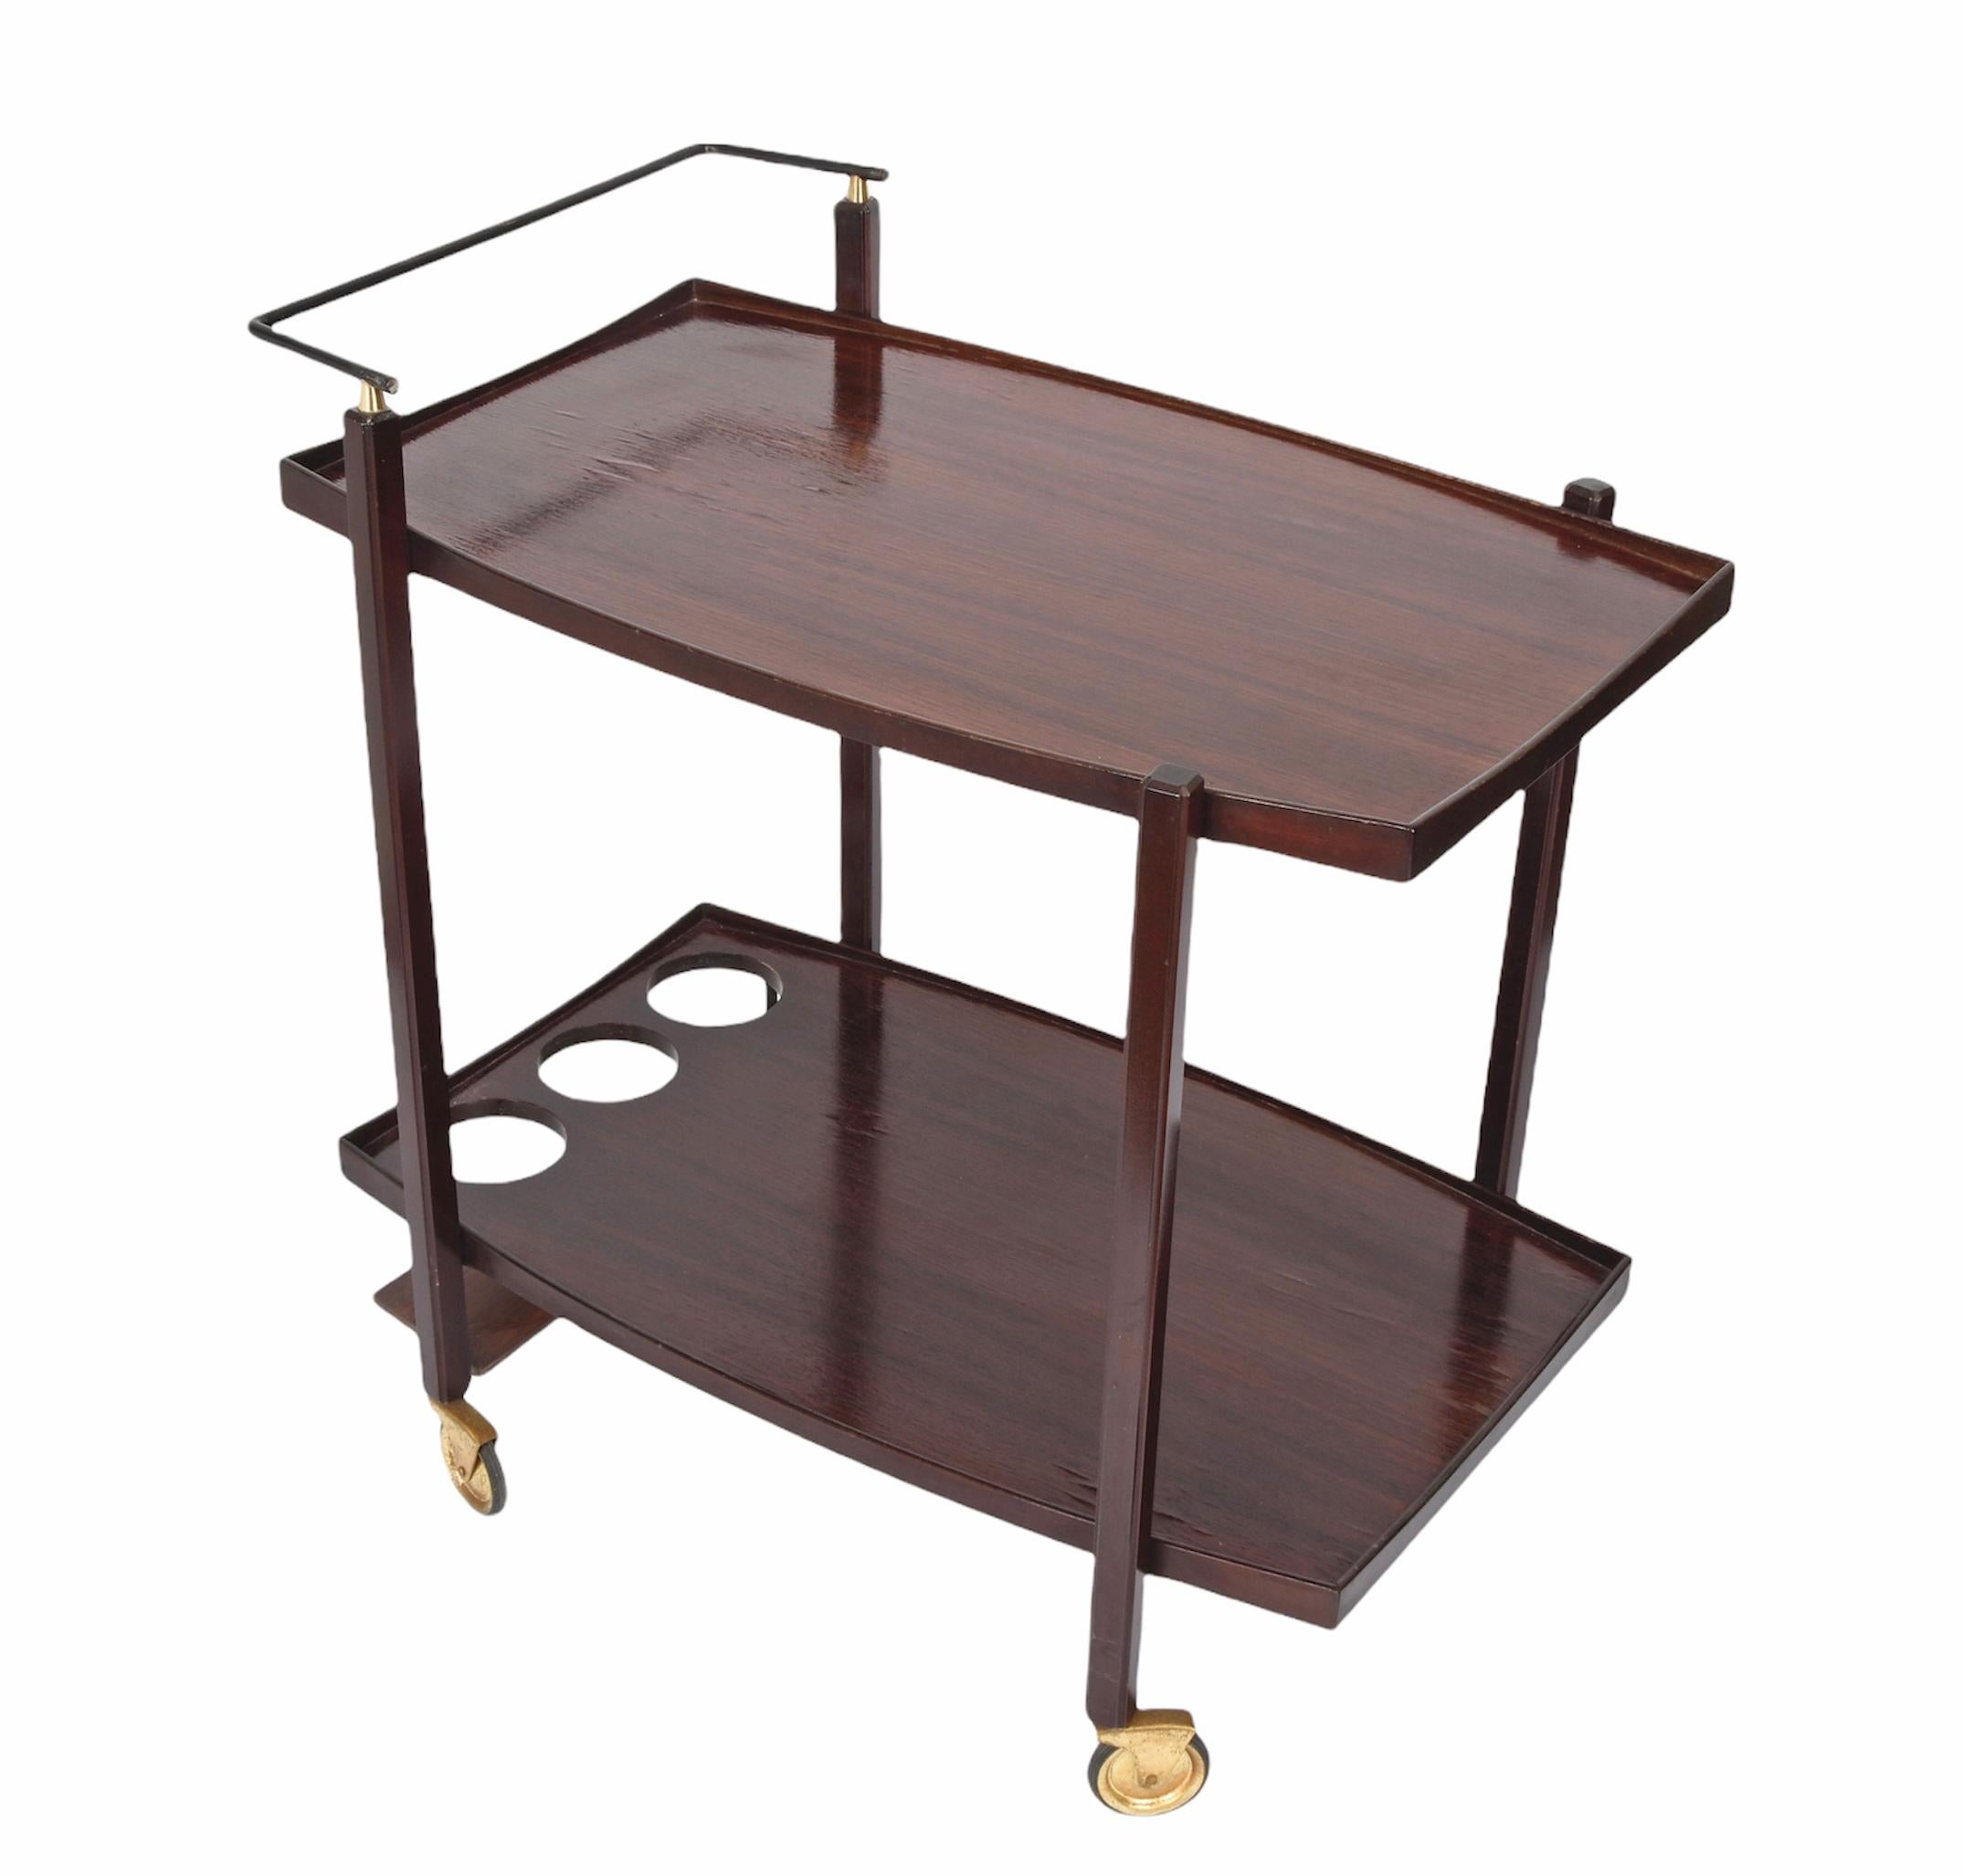 Lacquered Midcentury Wood Serving Bar Cart with Enameled Metal Bottle Holder, 1960s For Sale